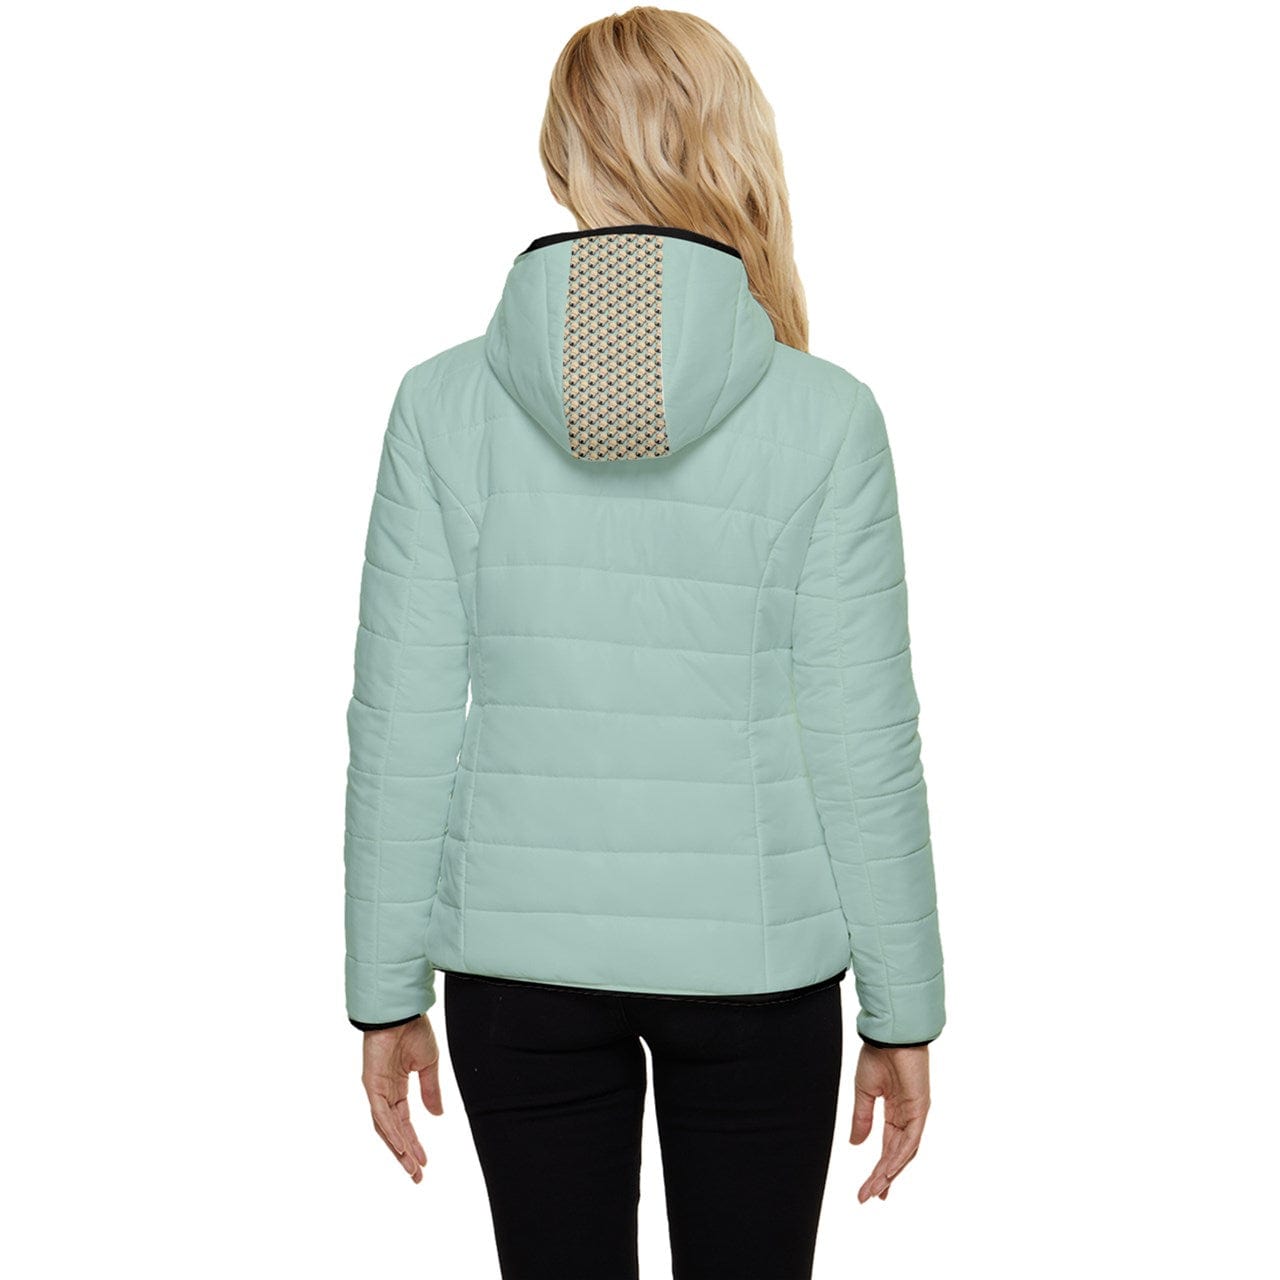 Wheaten Puppy Women's Hooded Quilted Jacket - Mint Green